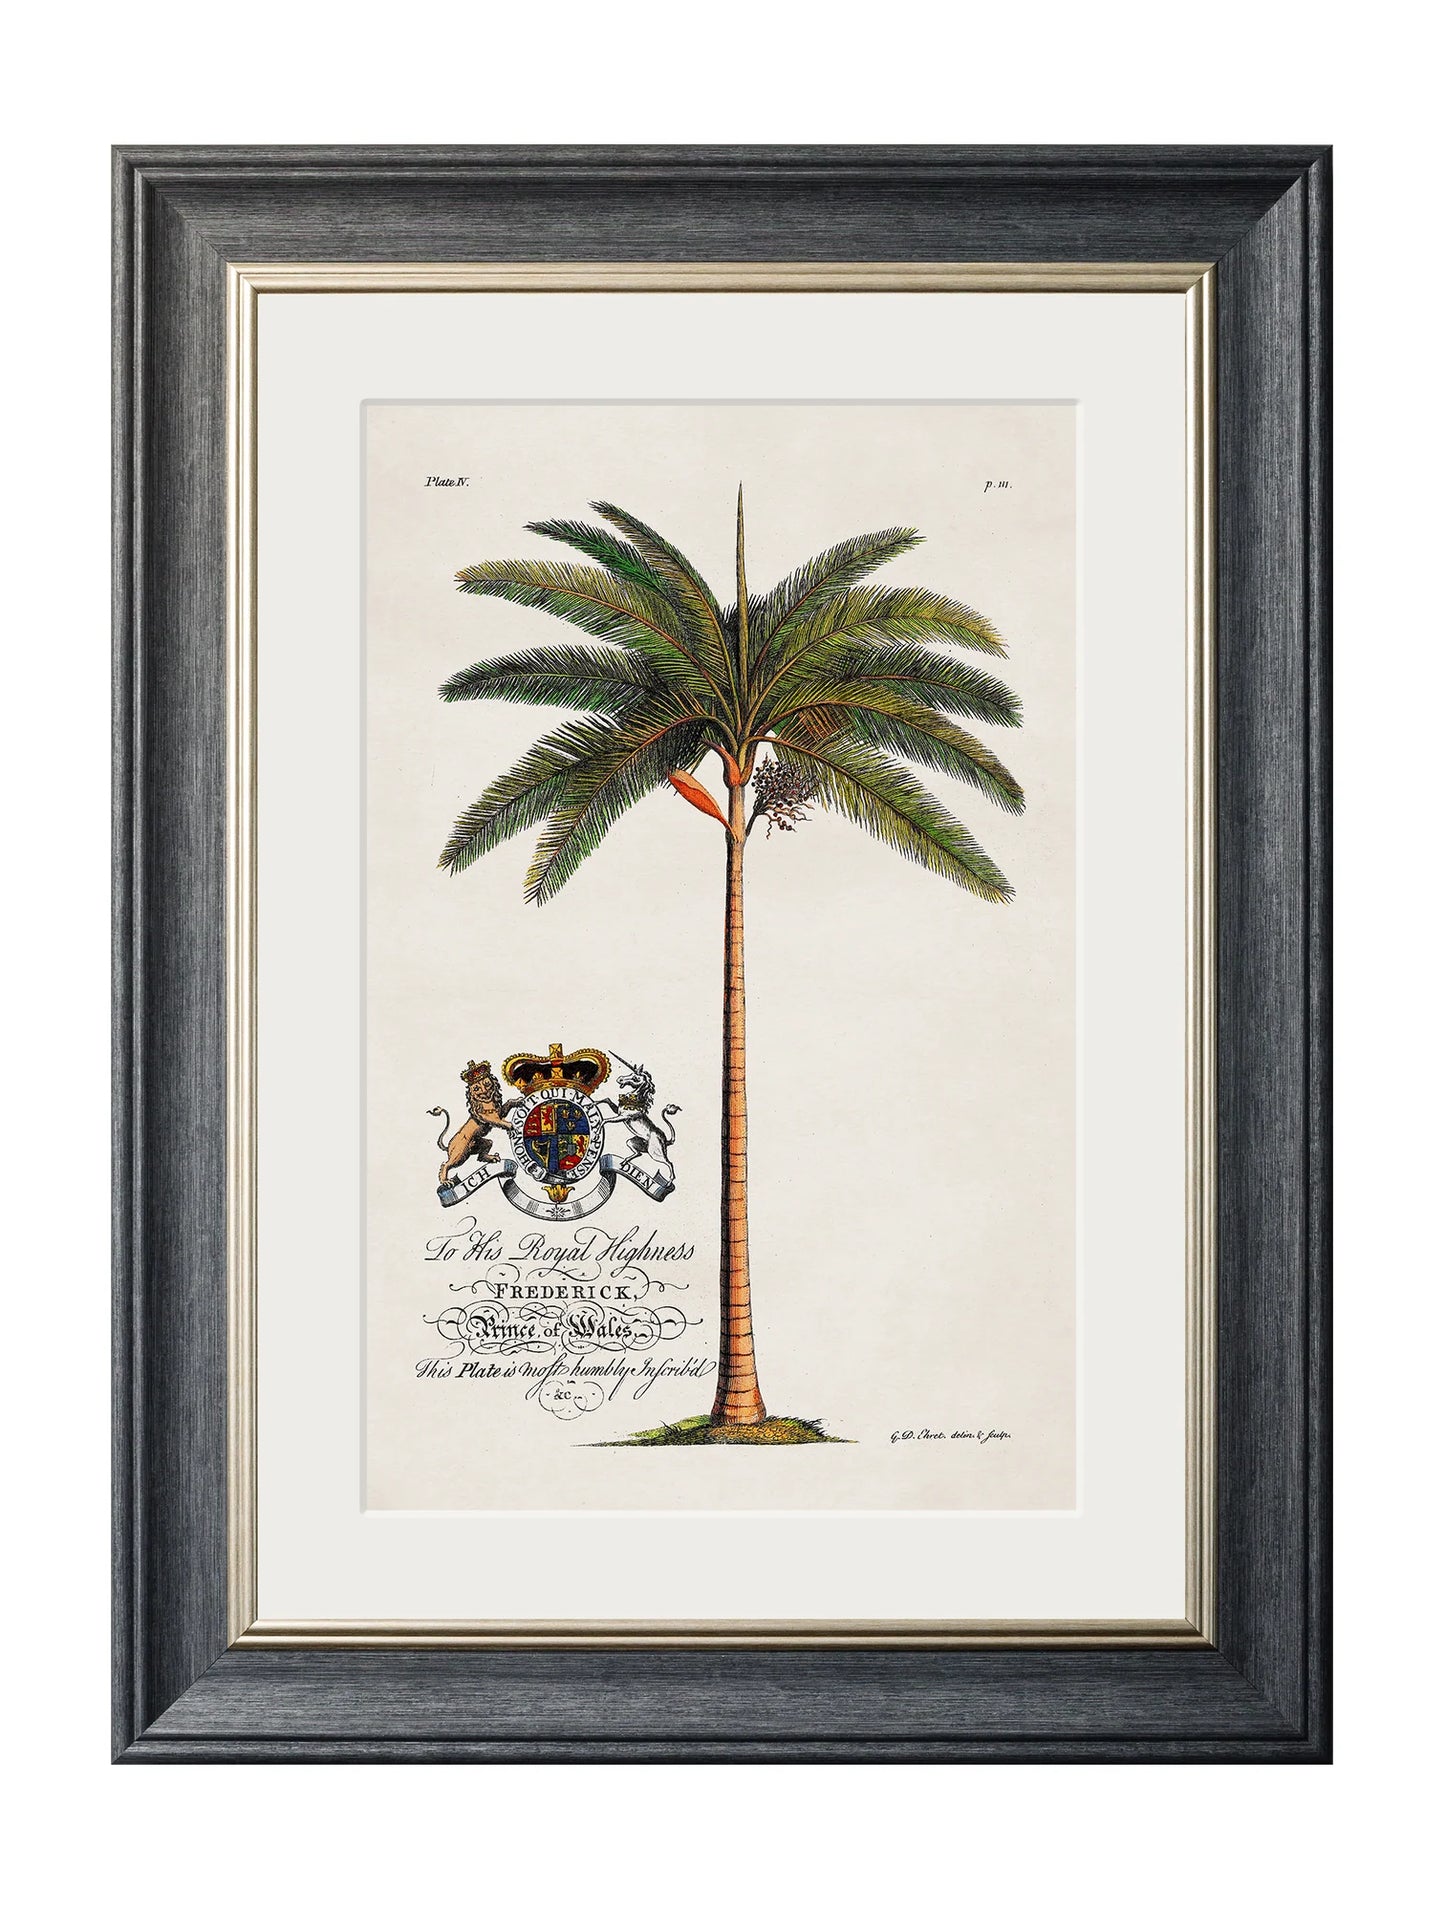 Framed Collection of Palms